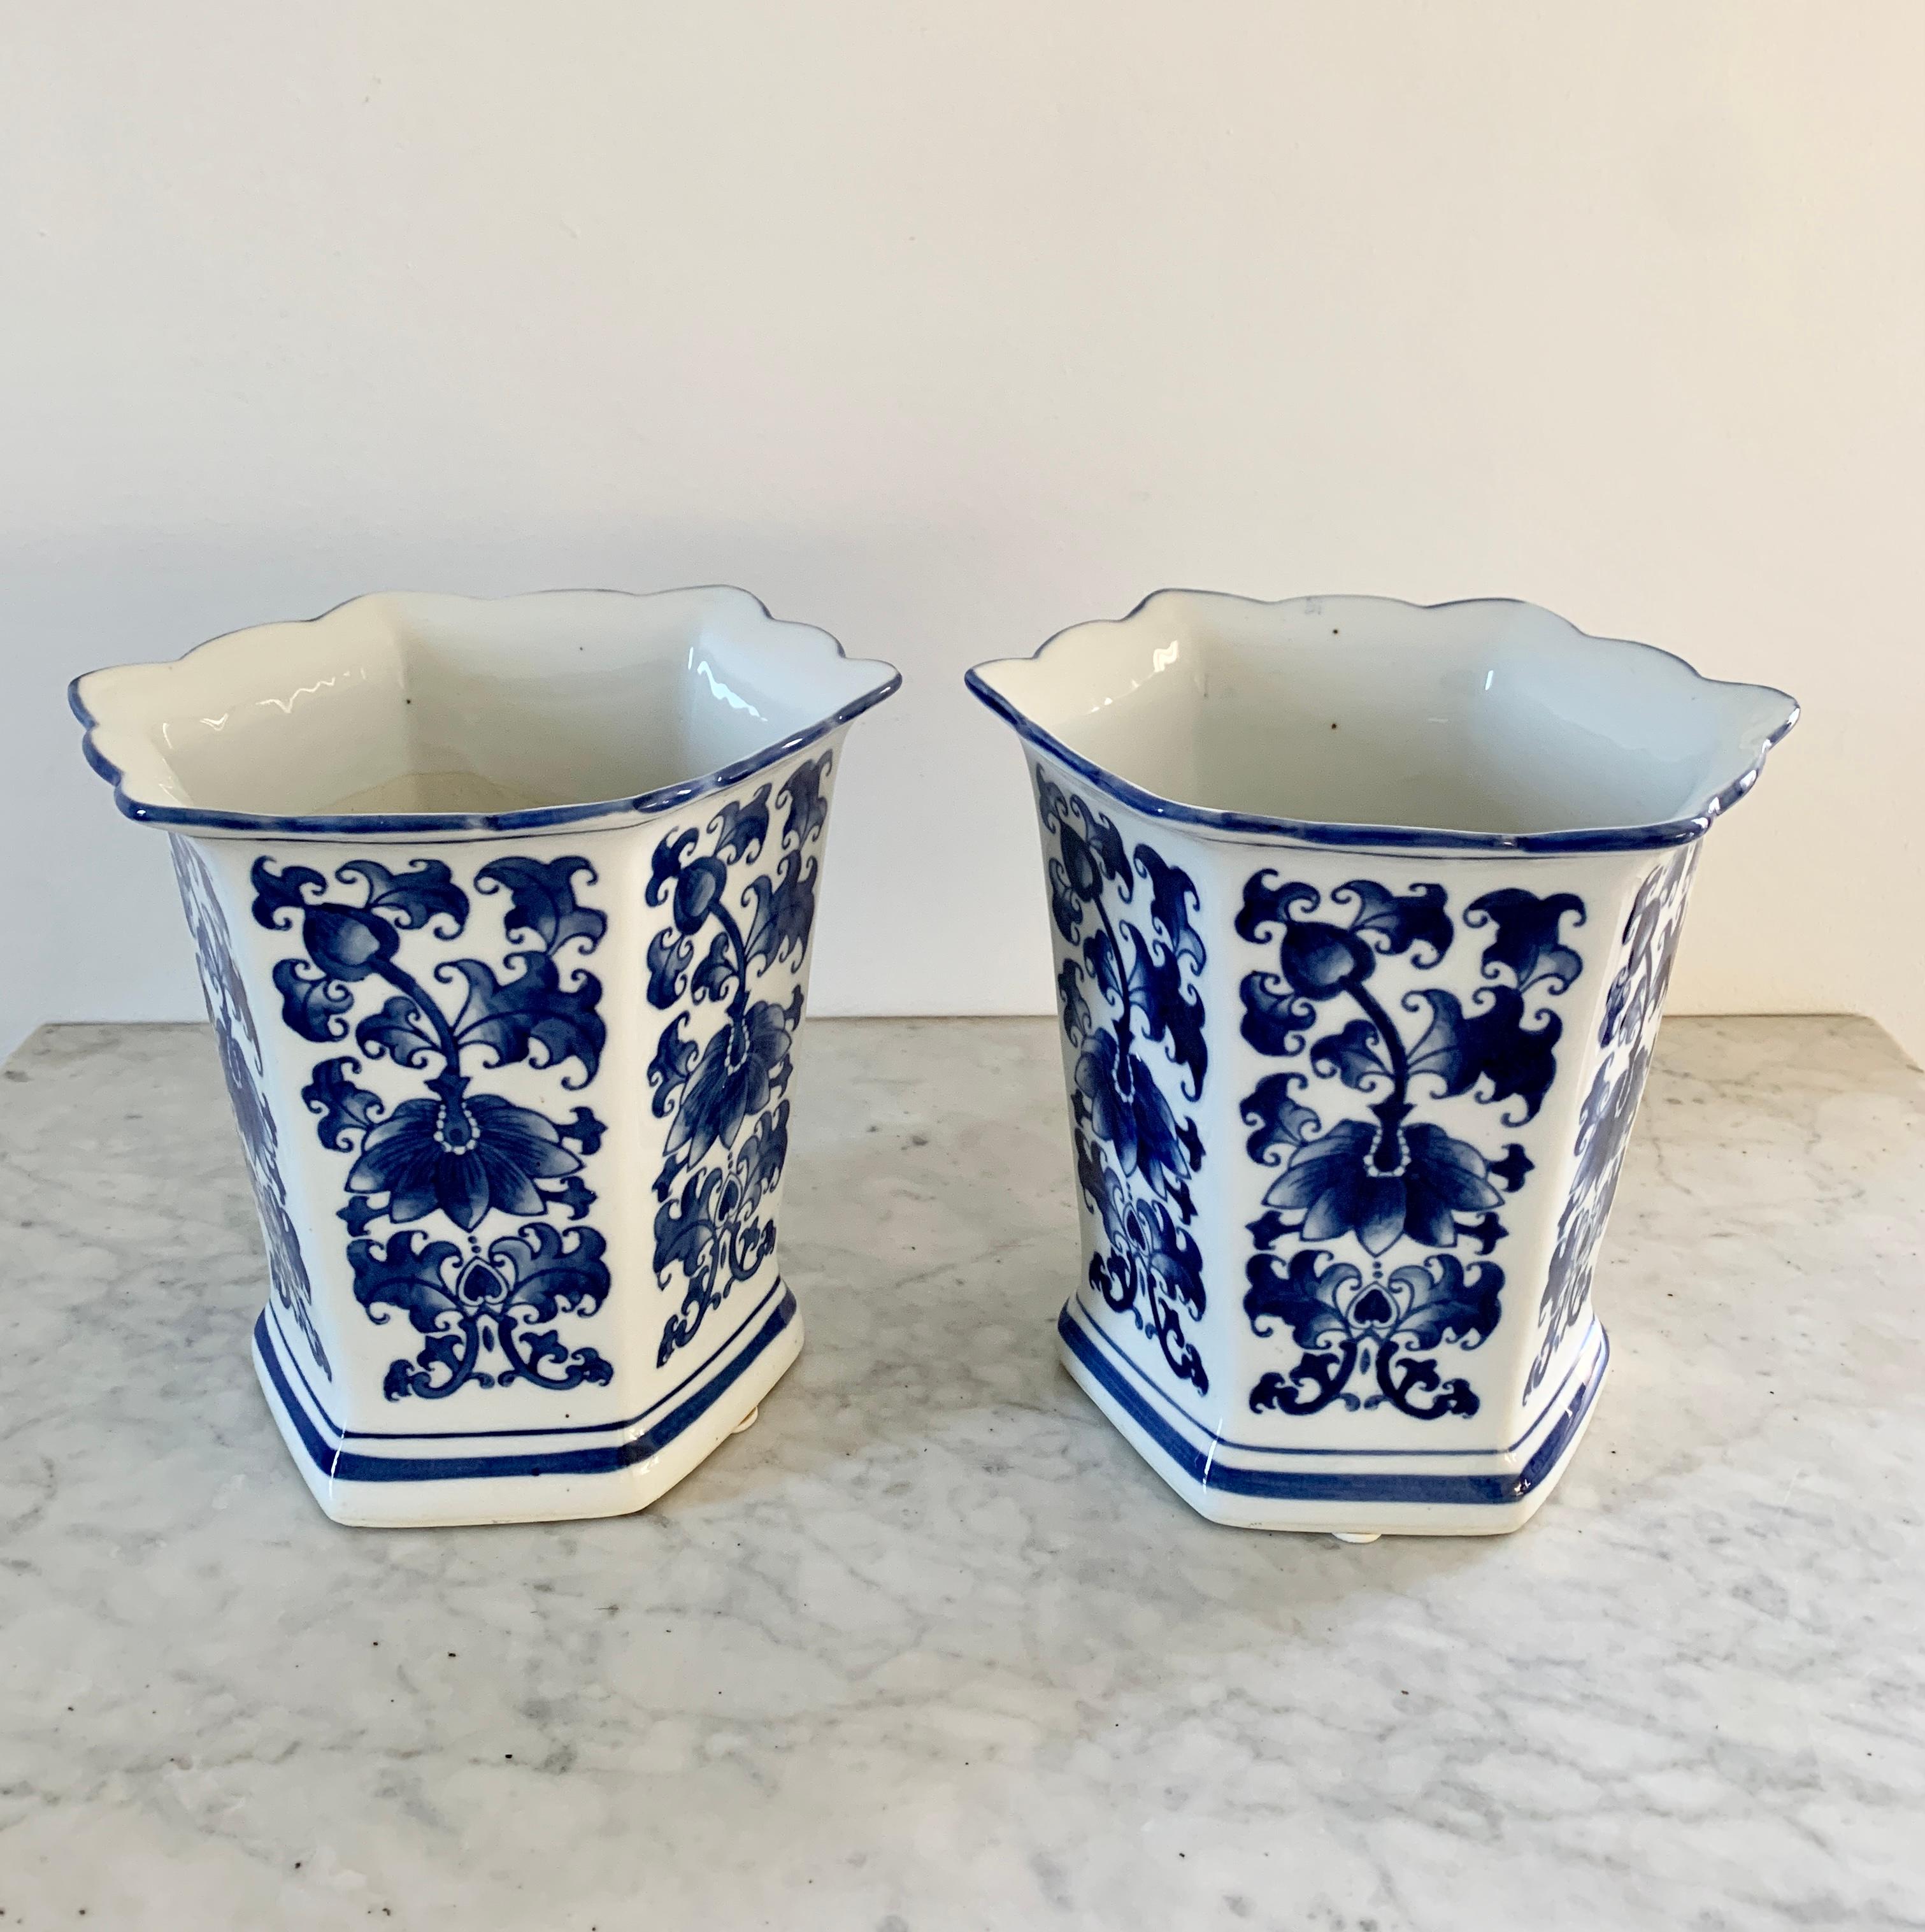 20th Century Chinoiserie Blue and White Porcelain Hexagonal Vases, Pair For Sale